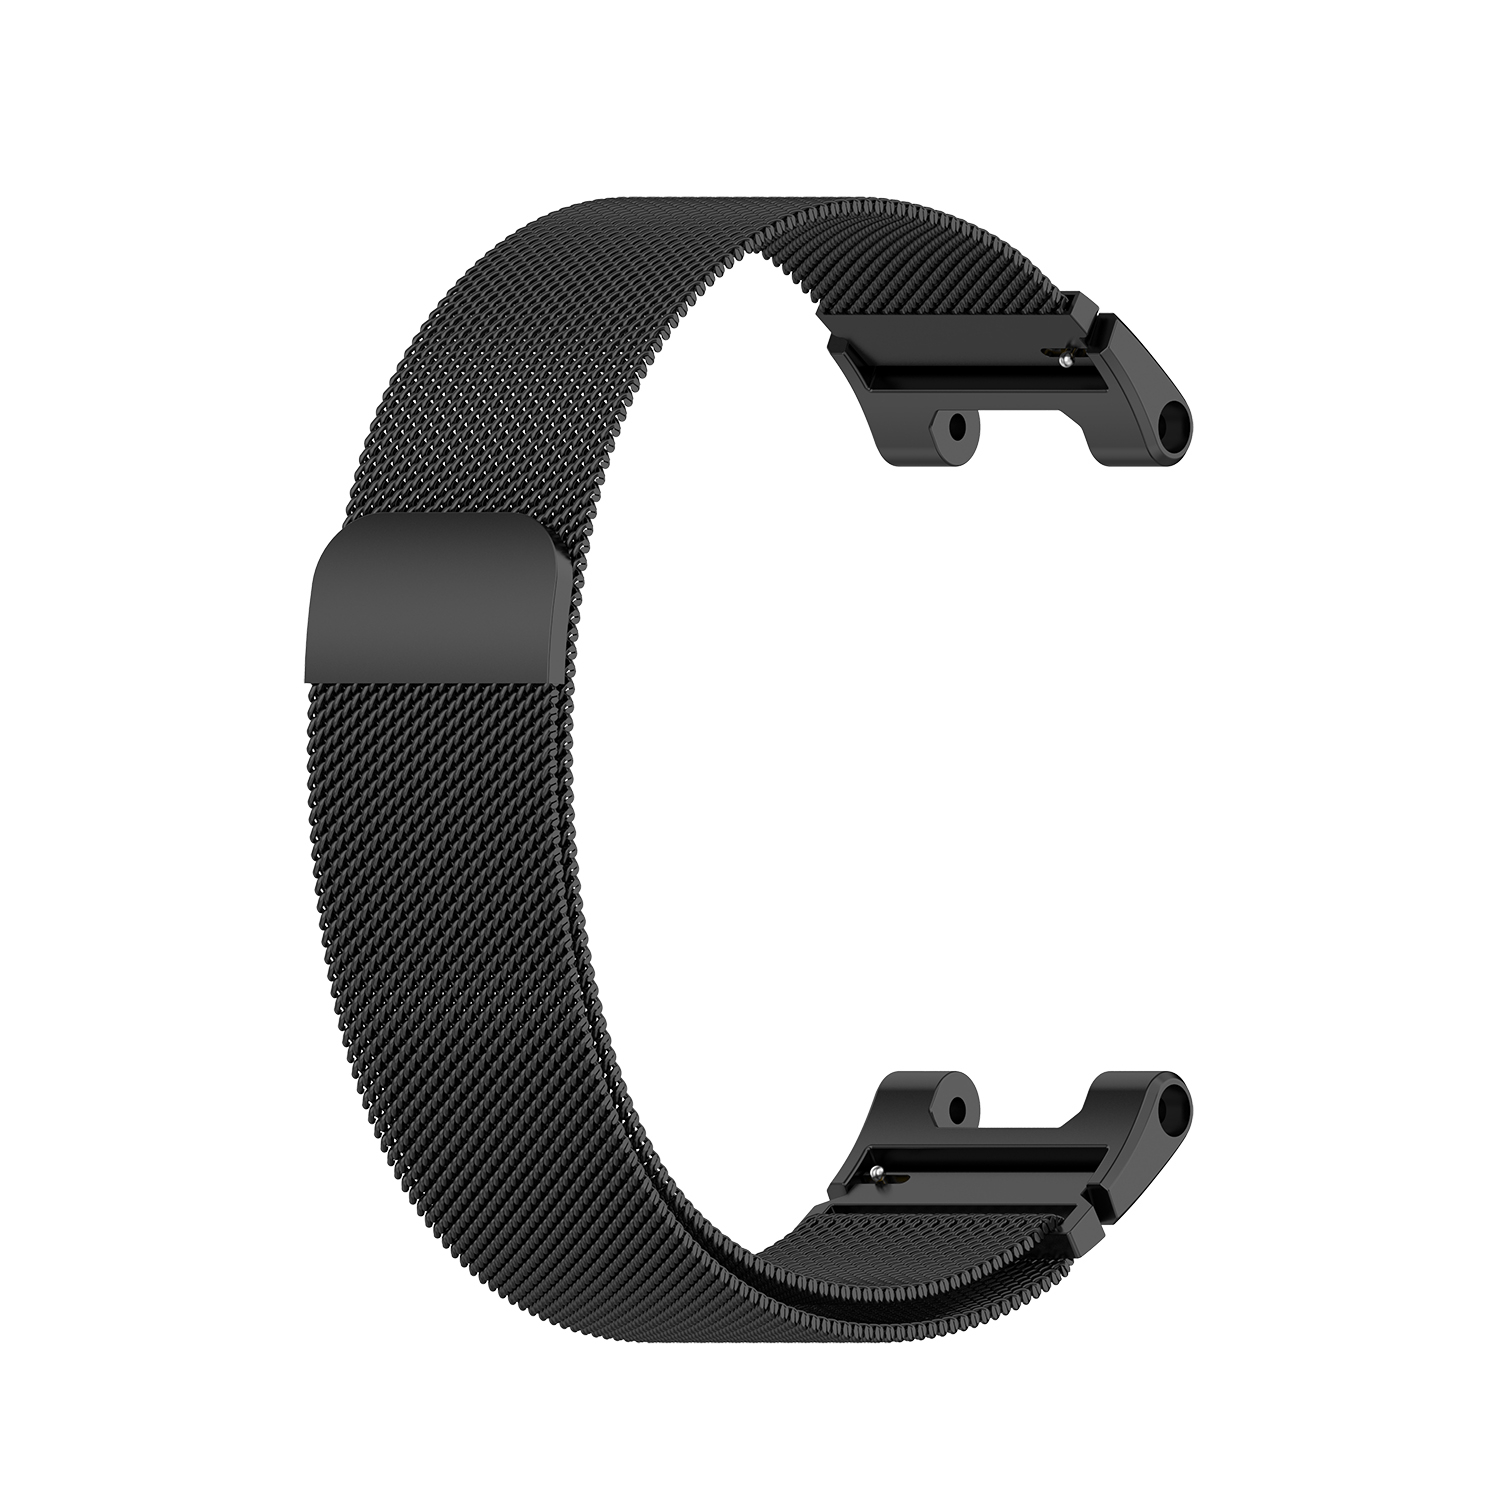 Bakeey-Milanese-Stainless-Steel-Strap-Watch-Band-Watch-Strap-Replacement-for-Amazfit-Ares-1748296-1